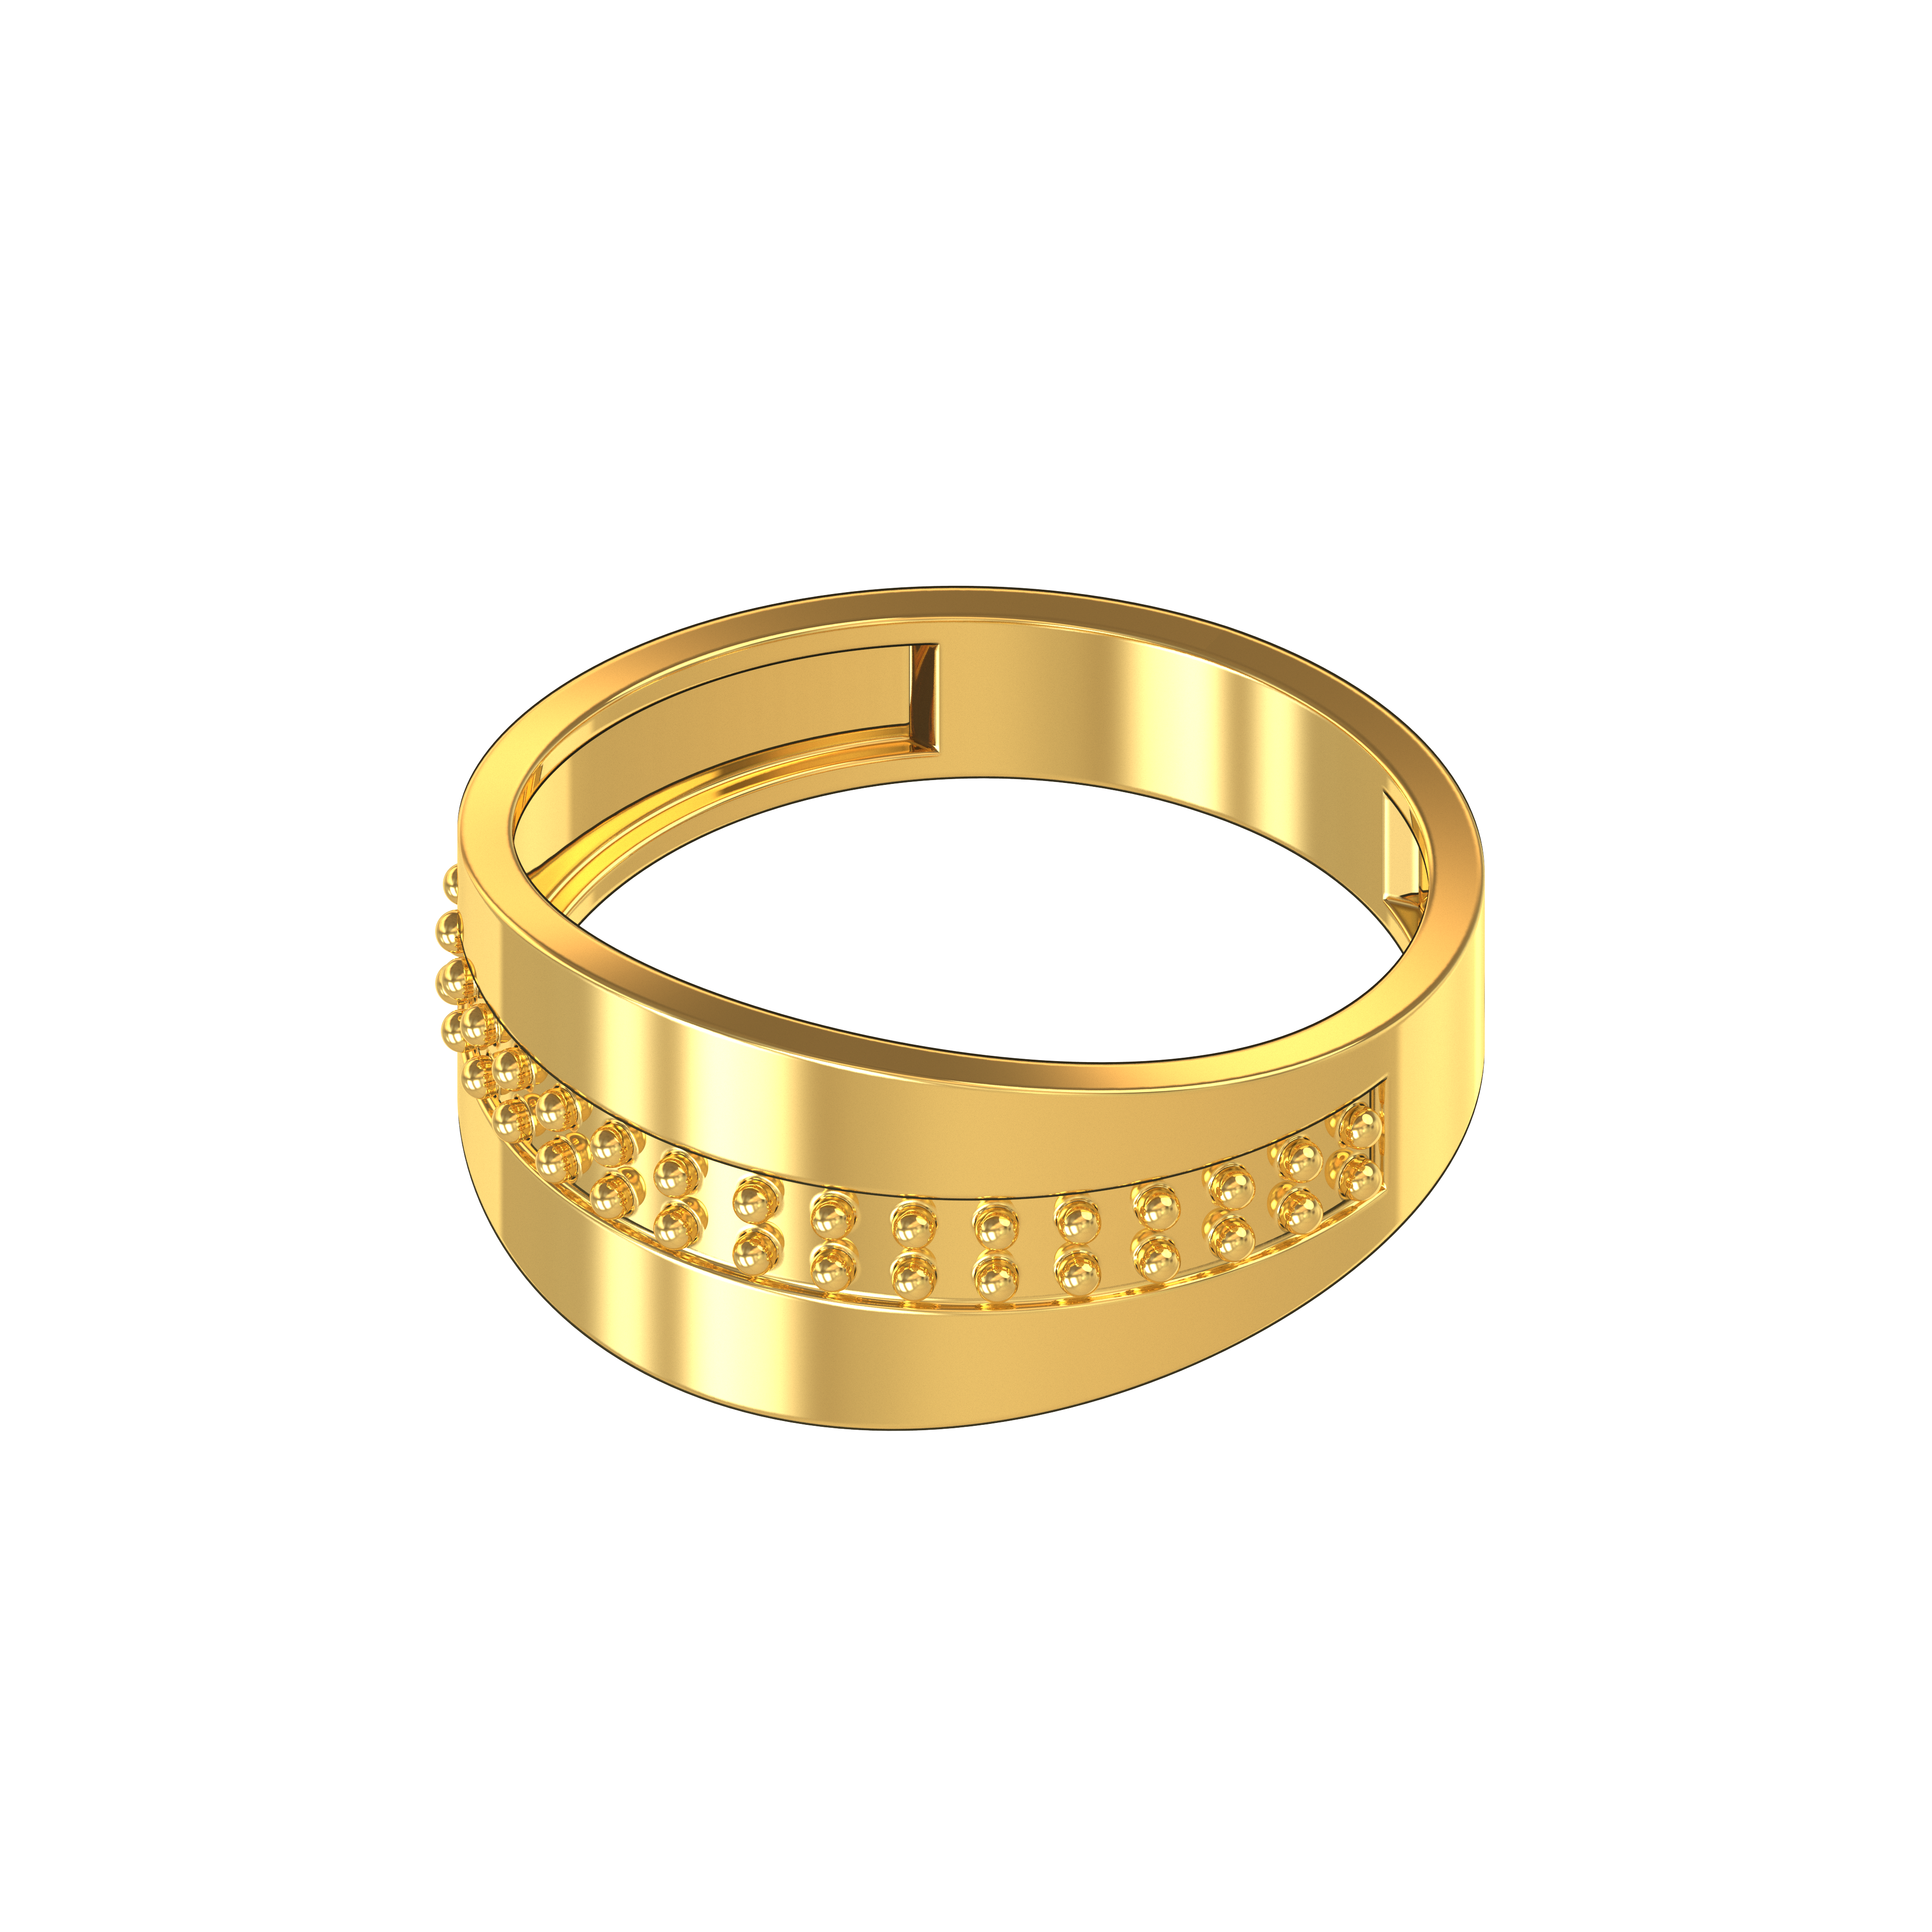 Boys ring design in gold, gents gold ring, Top 15 designs - YouTube-vachngandaiphat.com.vn